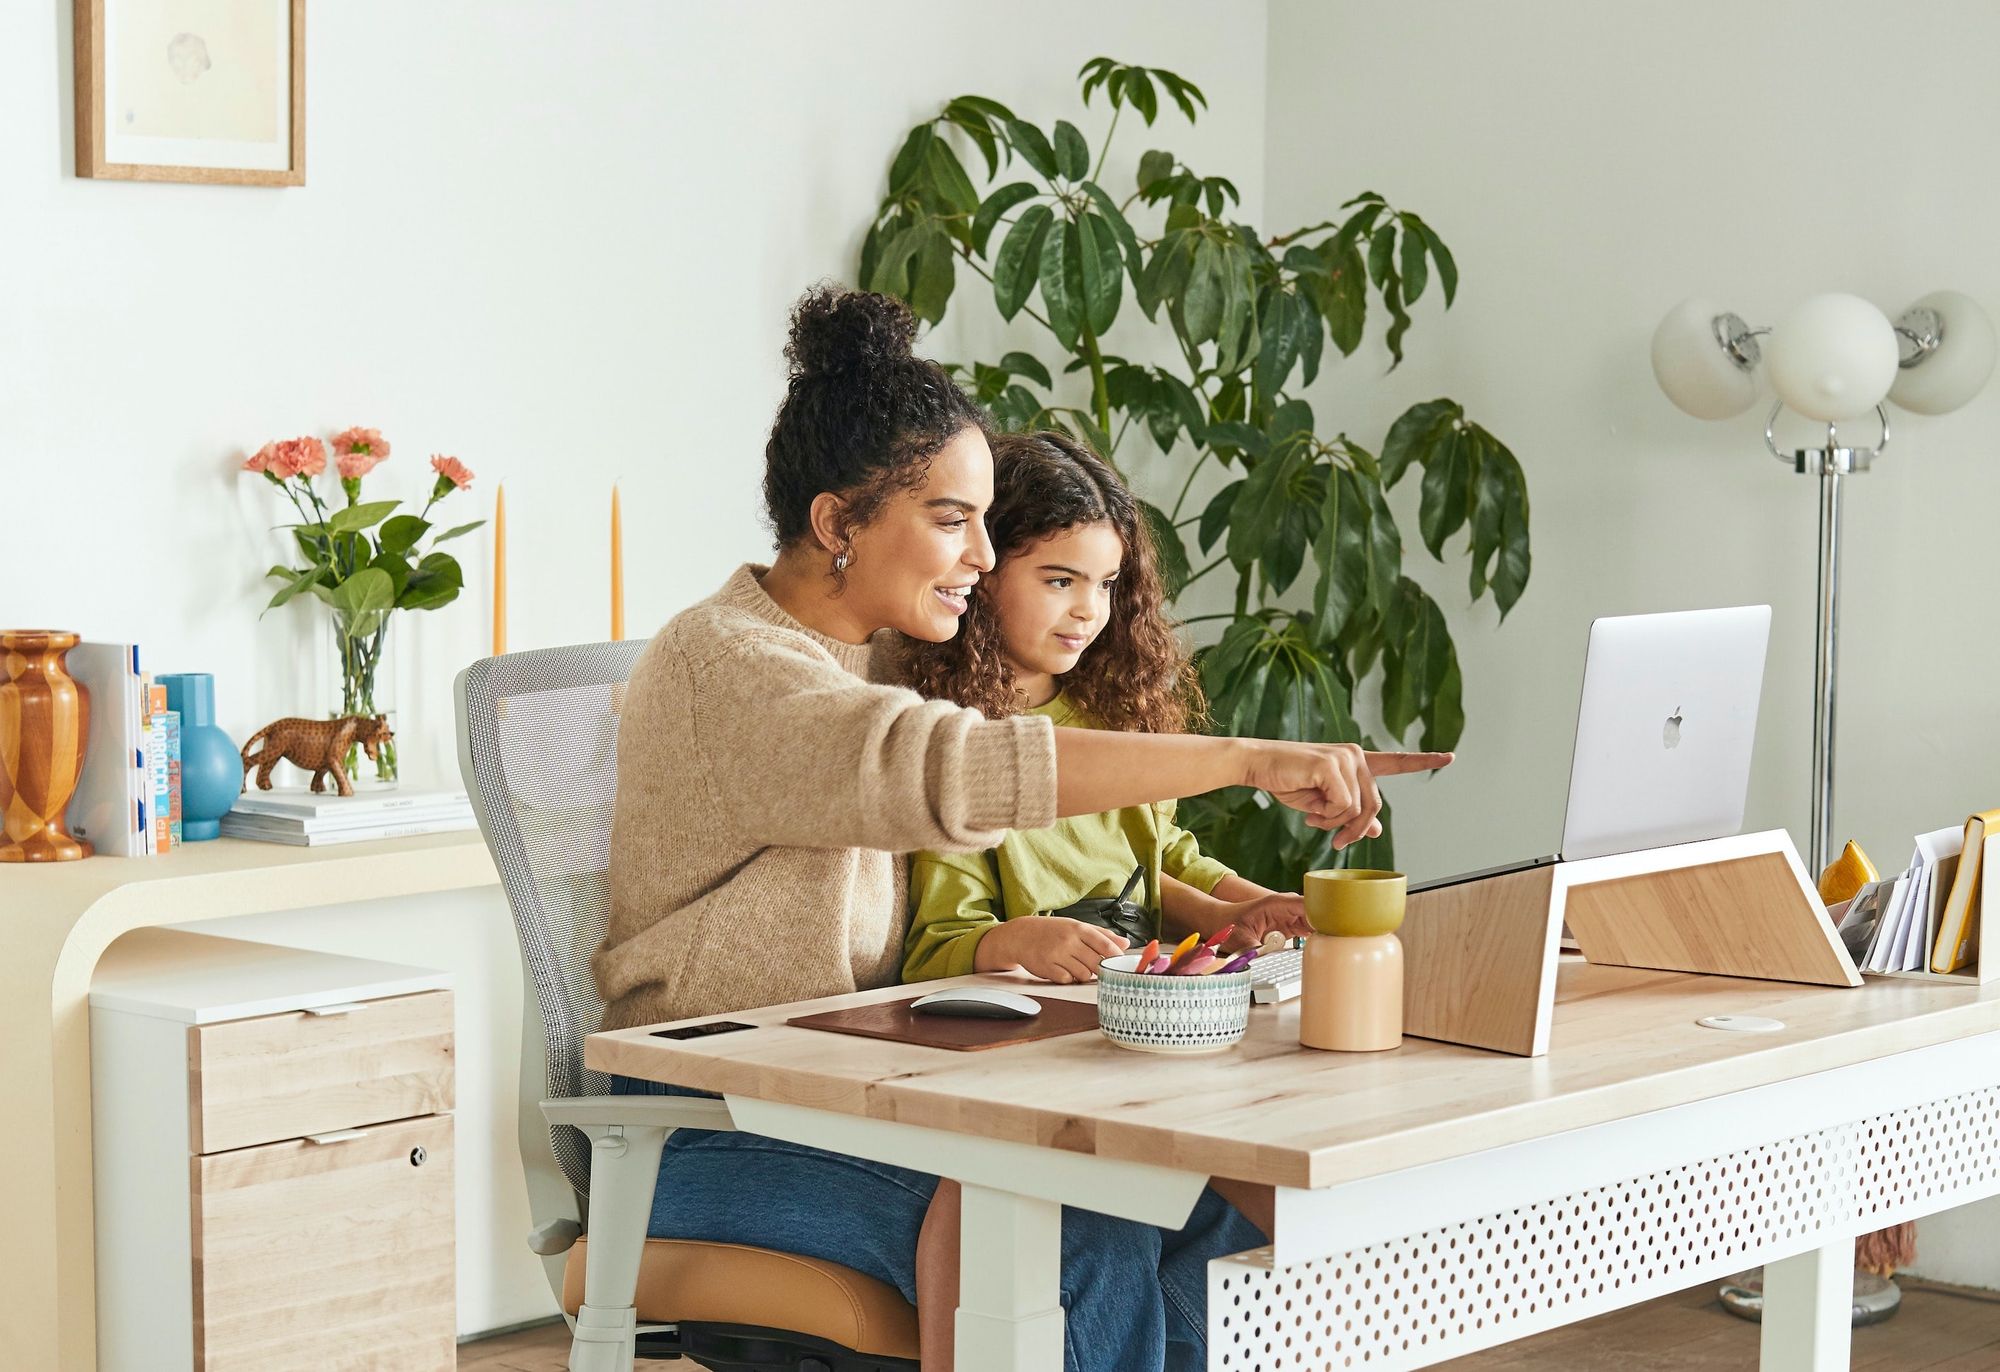 Mompreneurs: 9 Great Business Ideas For Stay at Home Mom Entrepreneurs